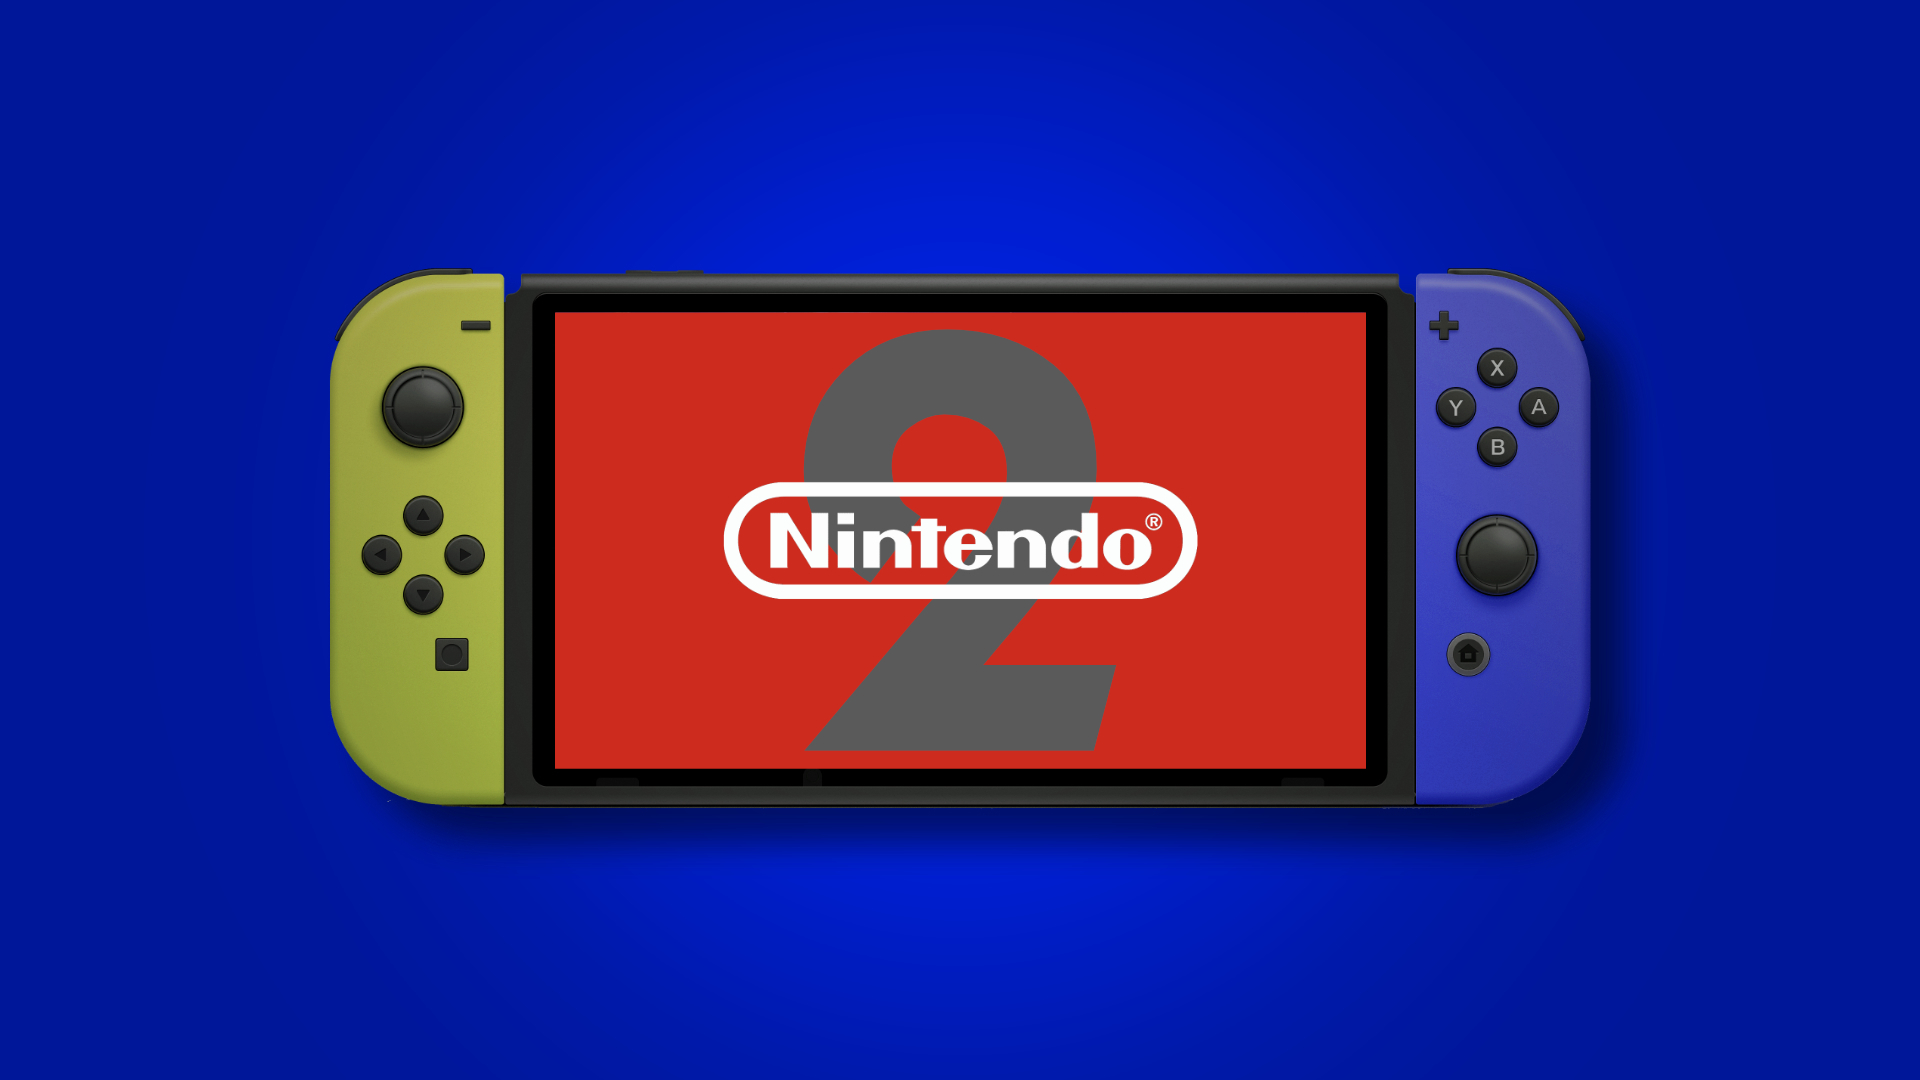 Nintendo Direct's Cross Outs (21st,June 2023) by Gilandes52 on